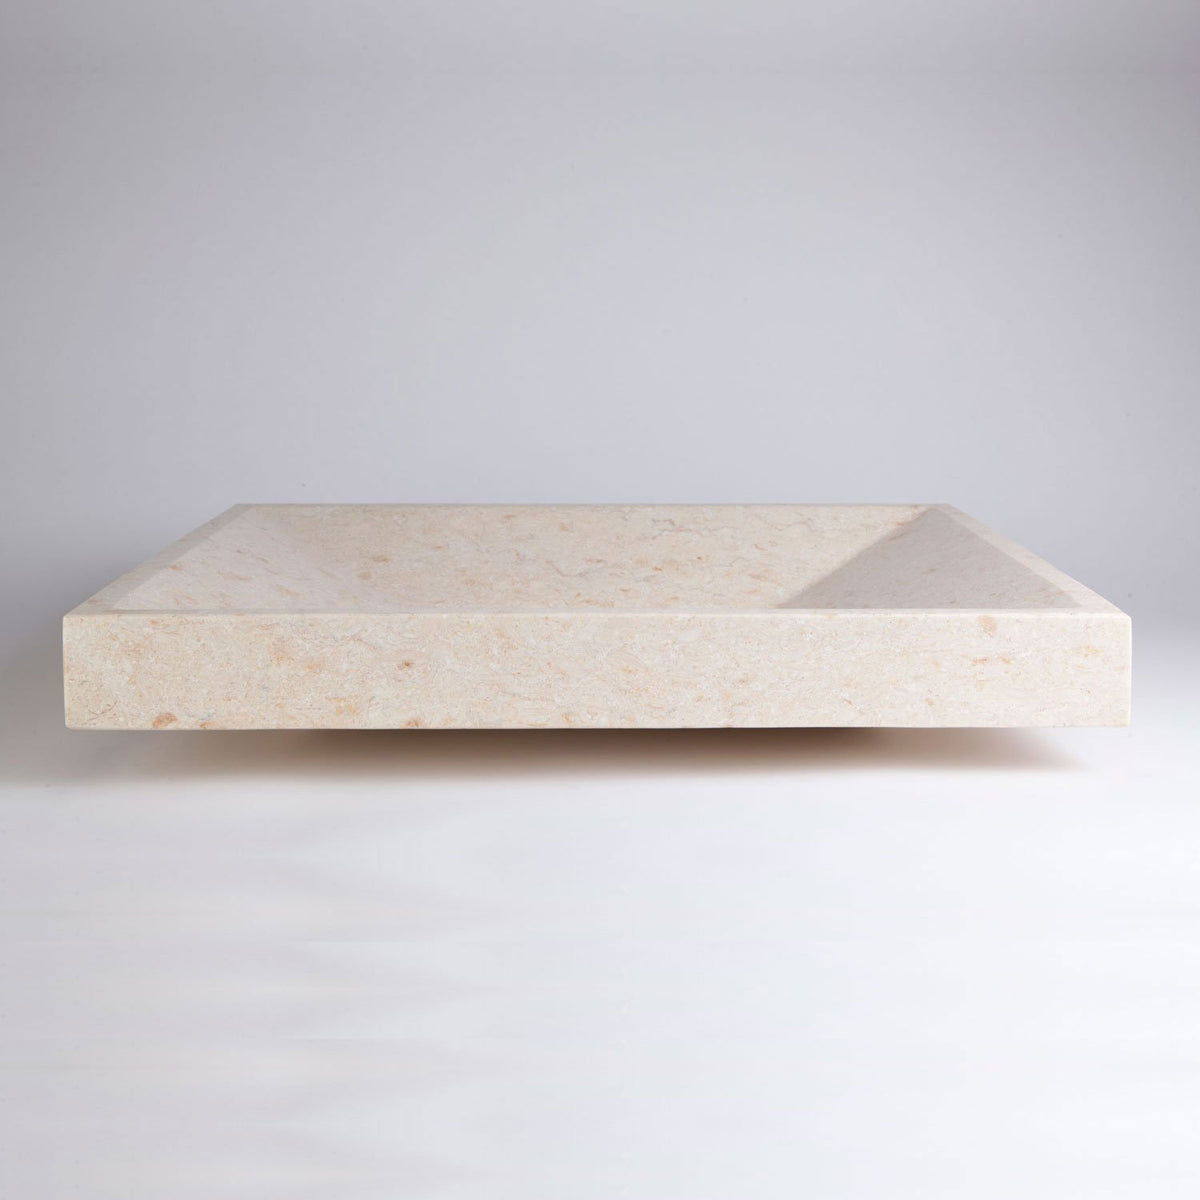 SYNC Drop-In Vessel Sink, Crema Marfil Marble image 3 of 4